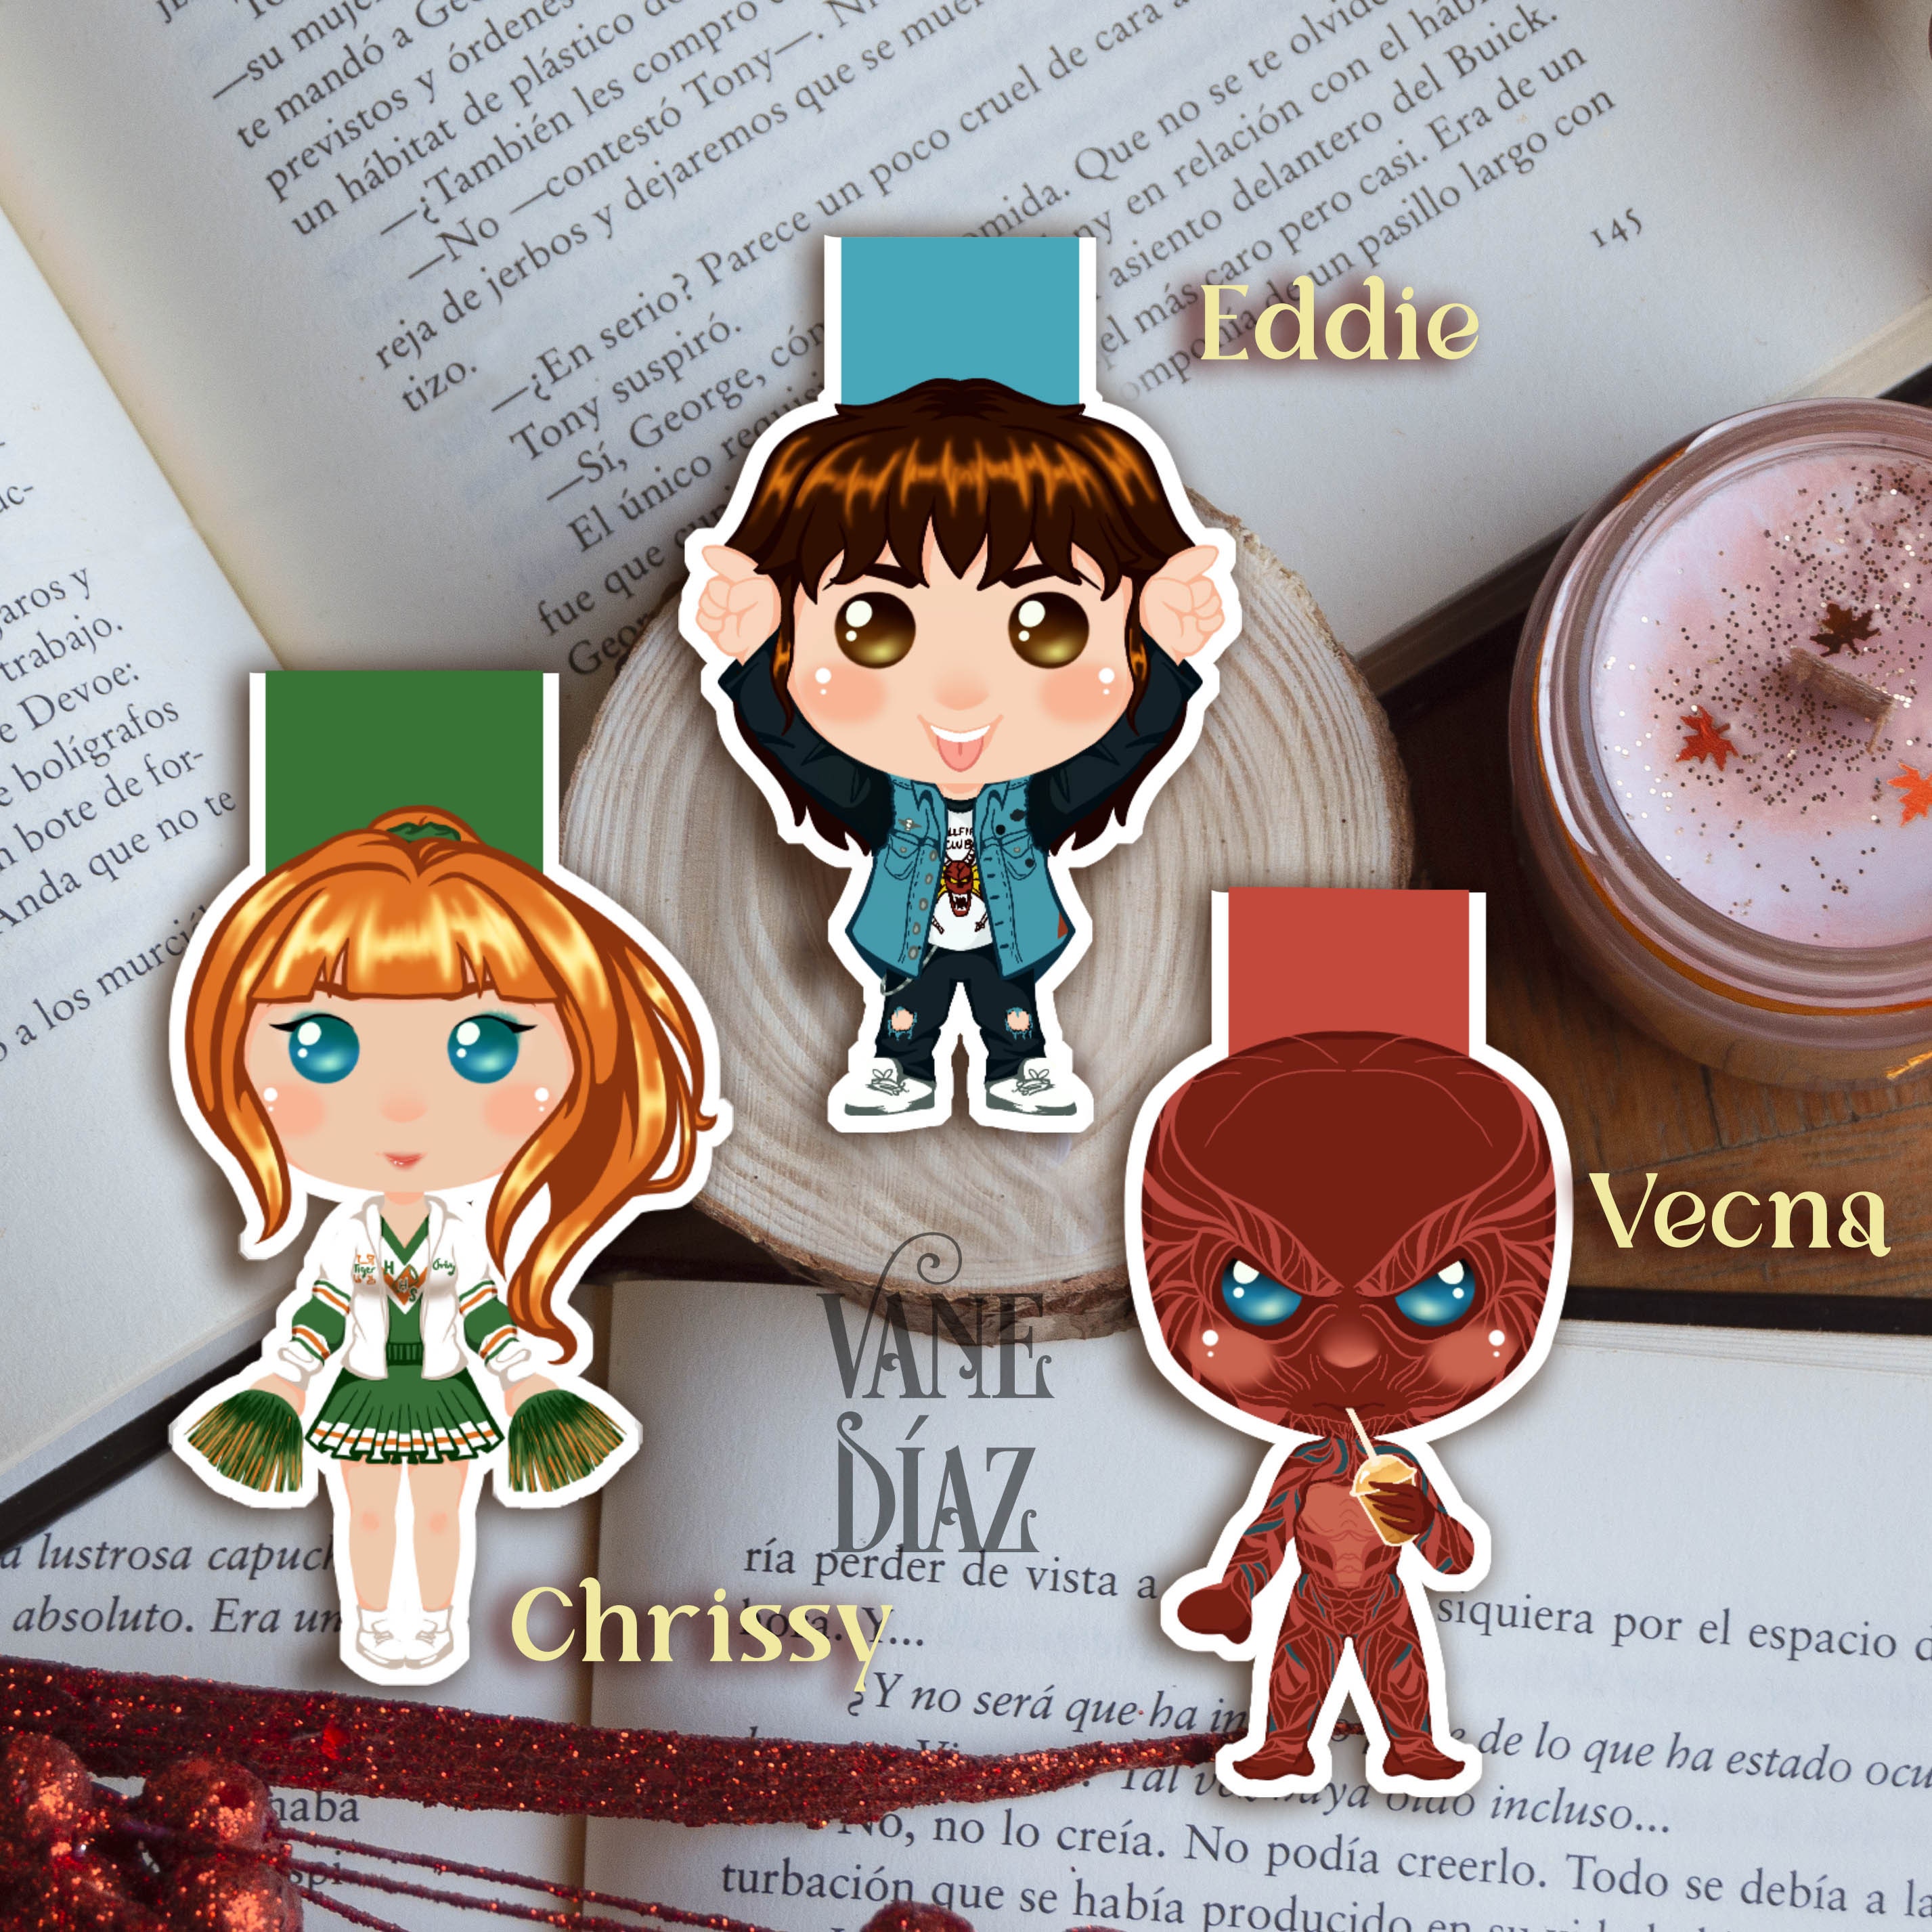 Stranger Things Bookmark Set - Bundle with 6 Collectible Stranger Things  Bookmarks Featuring Eleven and More | Stranger Things Merch and Stocking